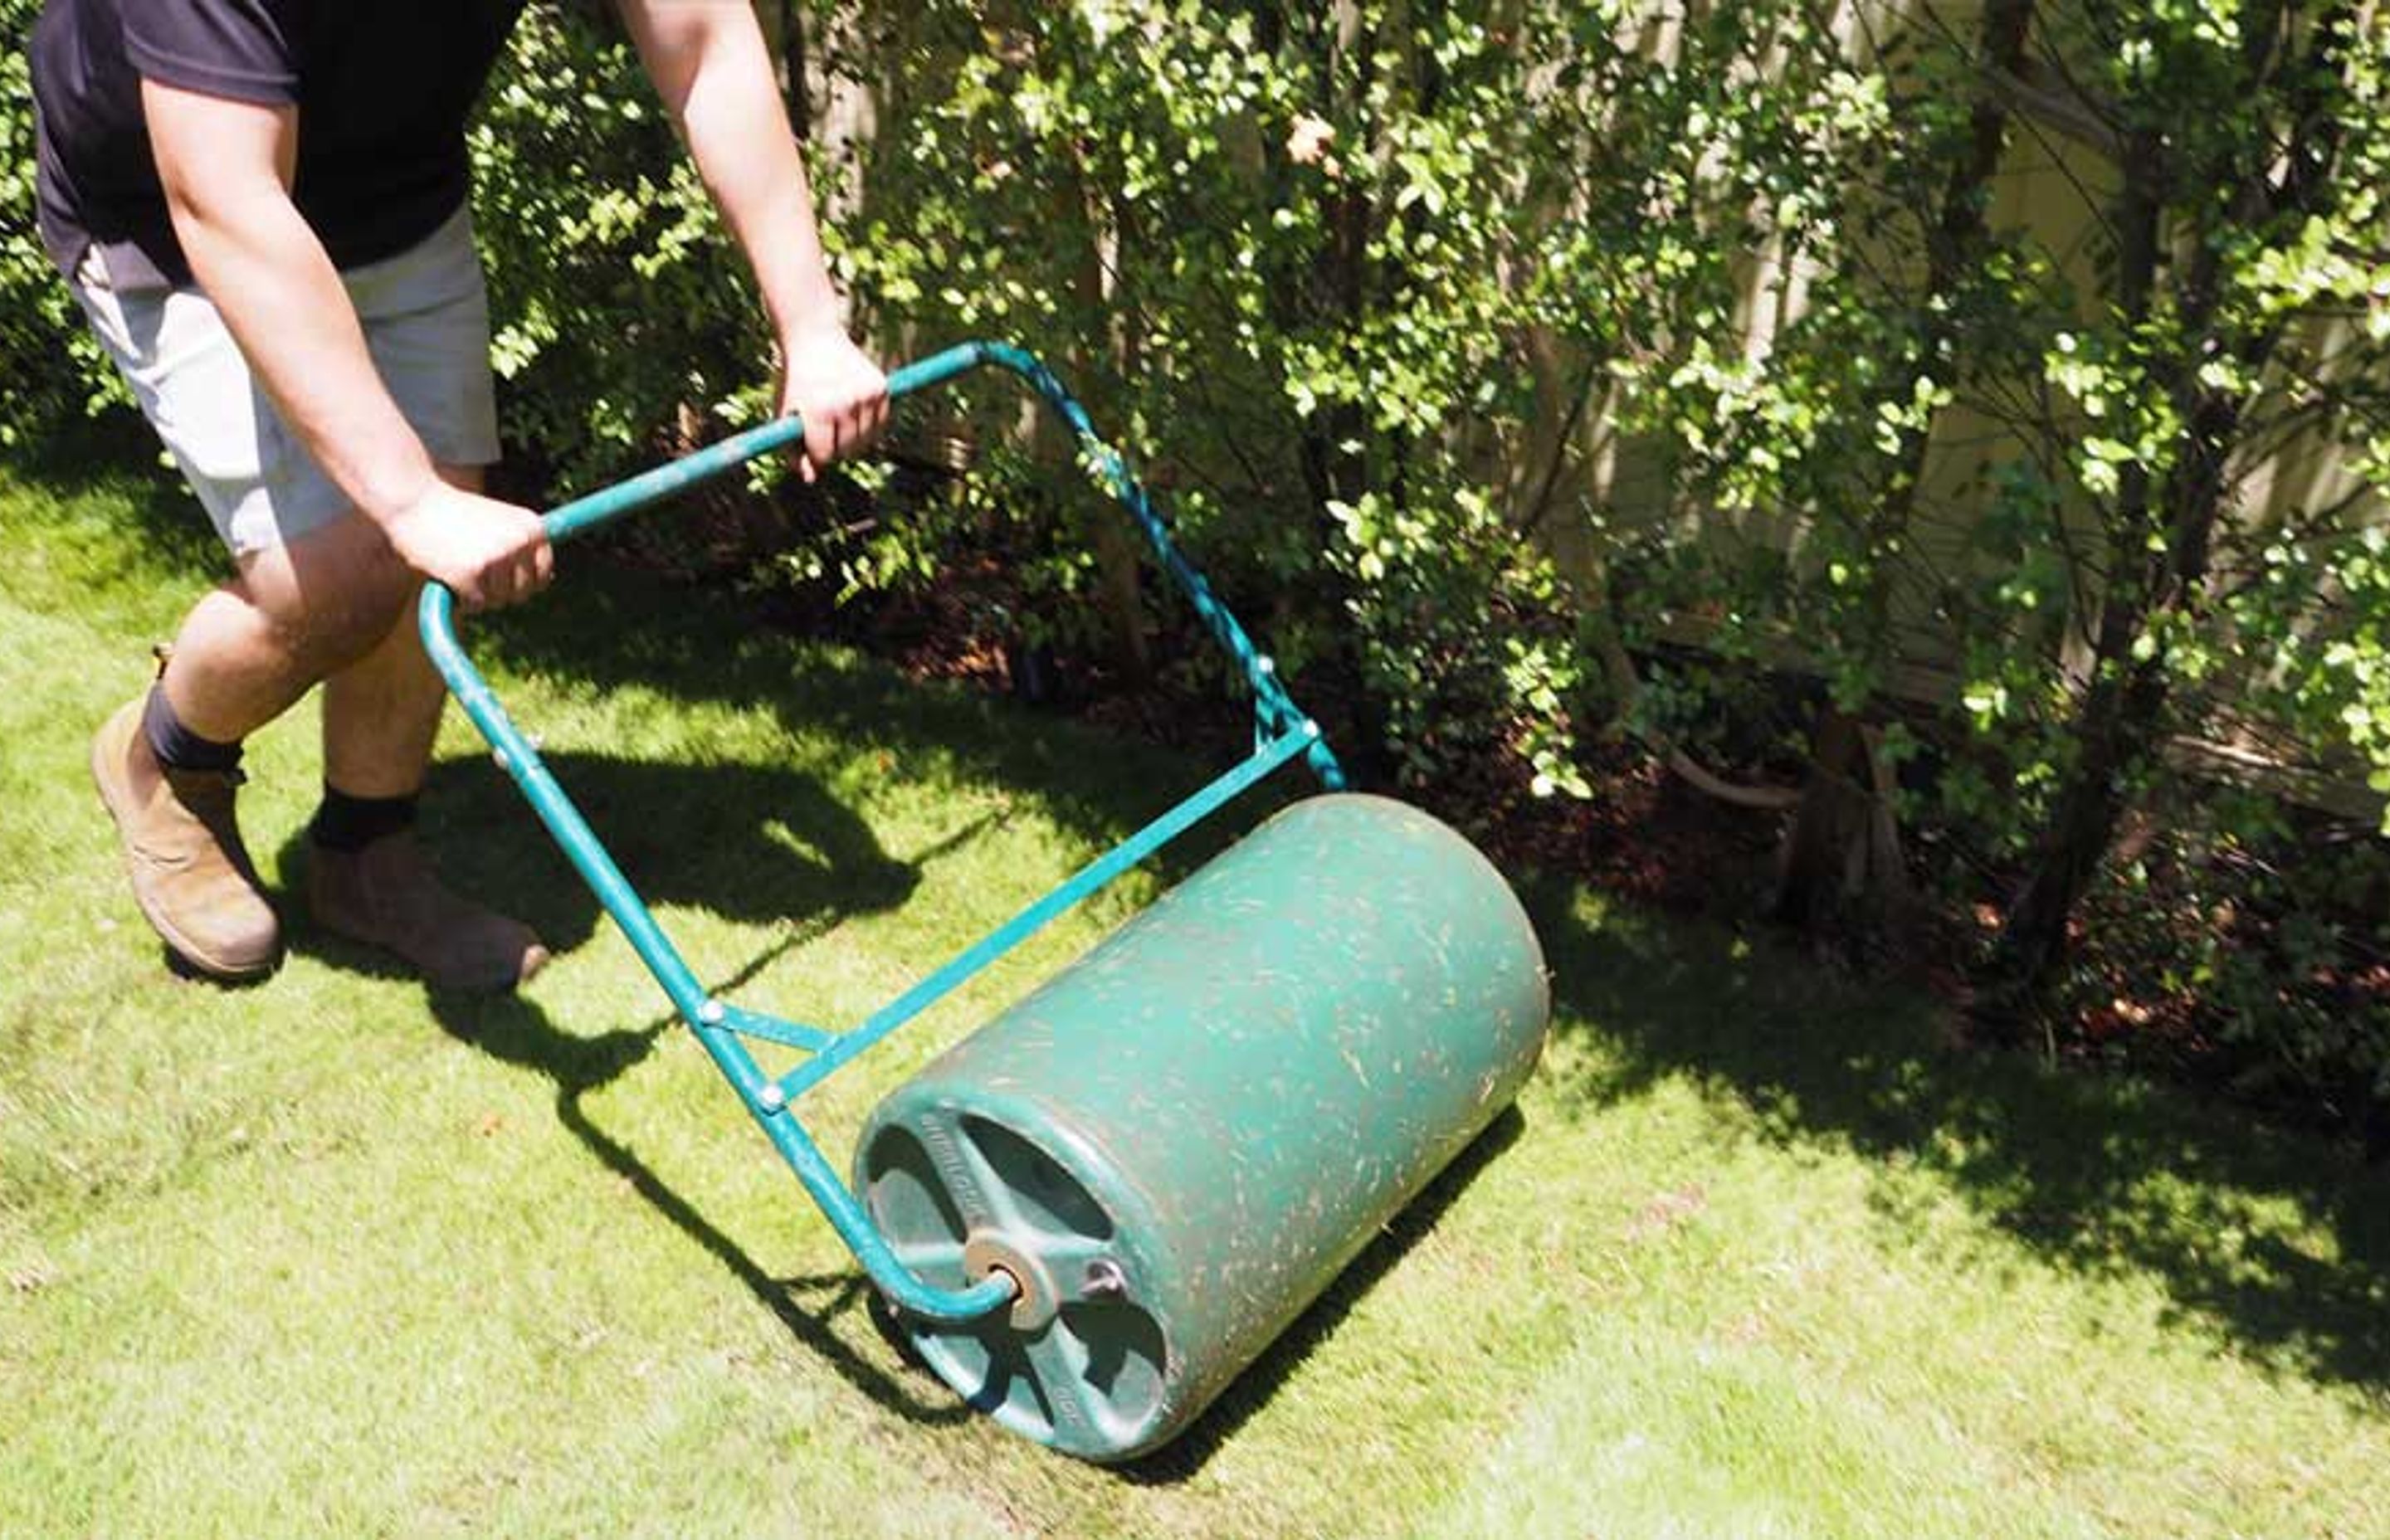 The Six Steps to laying your own lawn